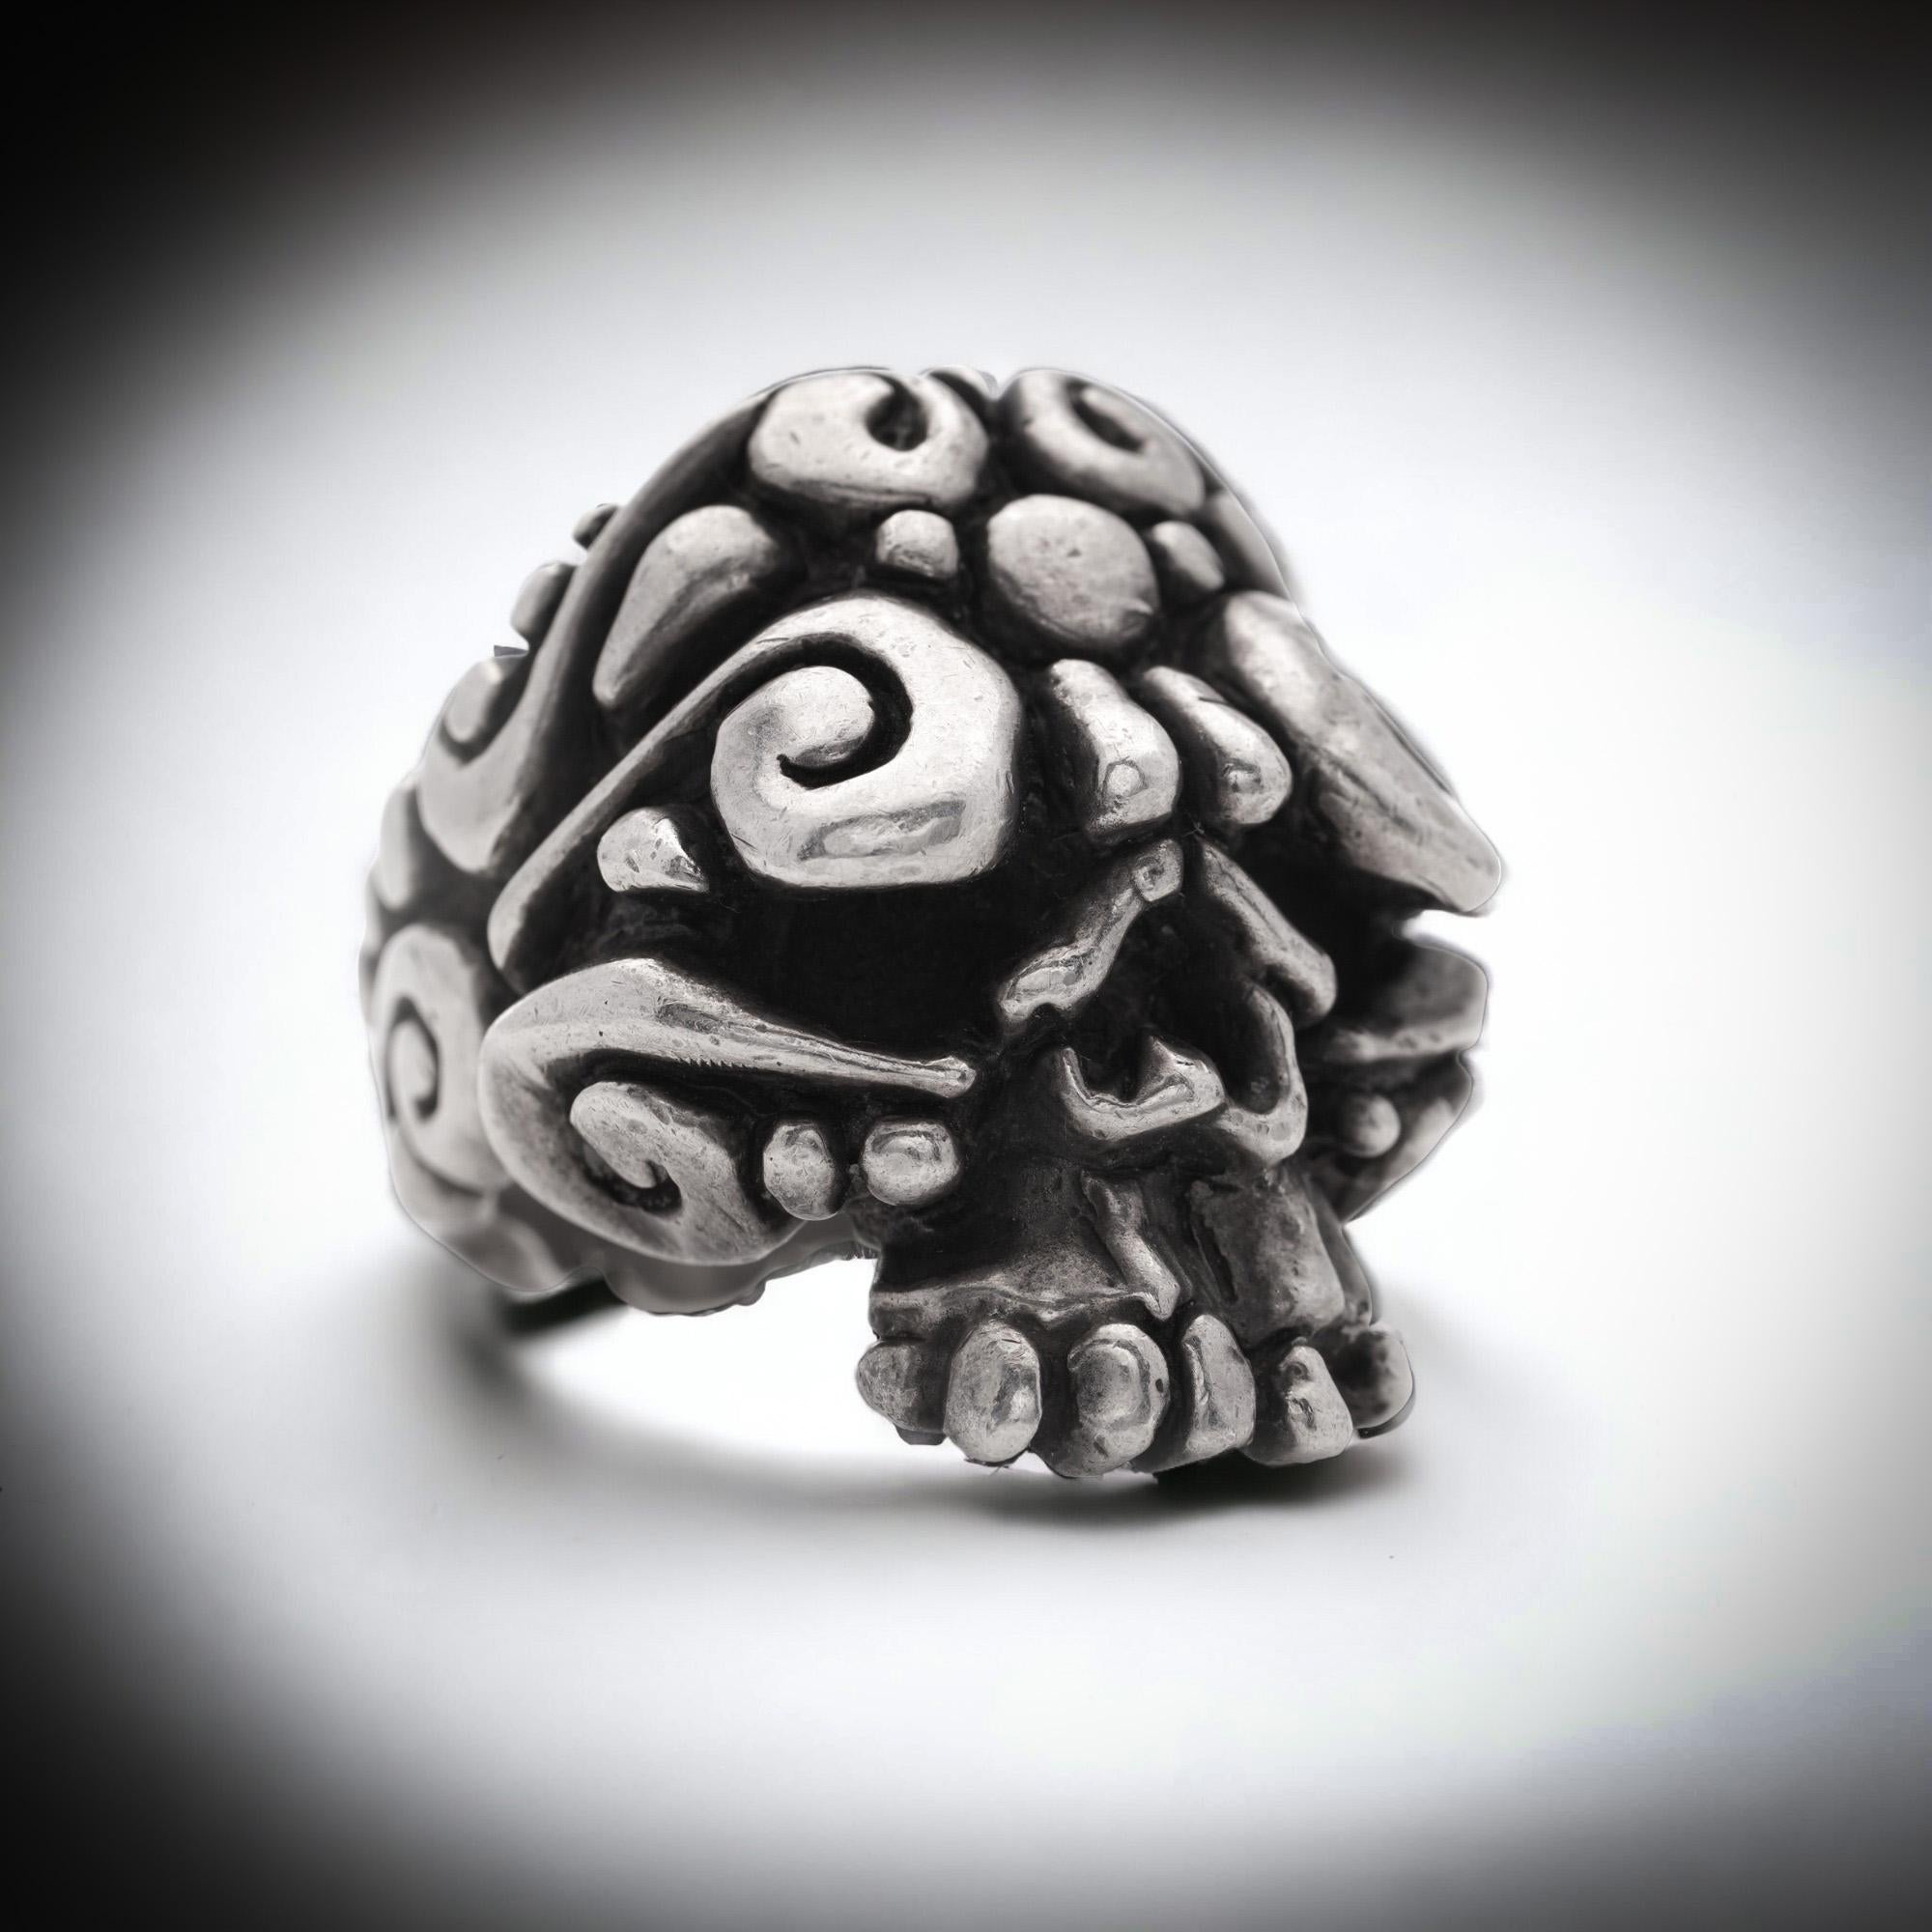 The Crazy Pig Designs 925 sterling silver ' El Muerto ' collection skull ring. 
Made in the United Kingdom, London.
Maker: The Crazy Pig Designs 
Hallmarked with the maker's mark and 925 silver. 
The inside of the shank has a personal engraving.